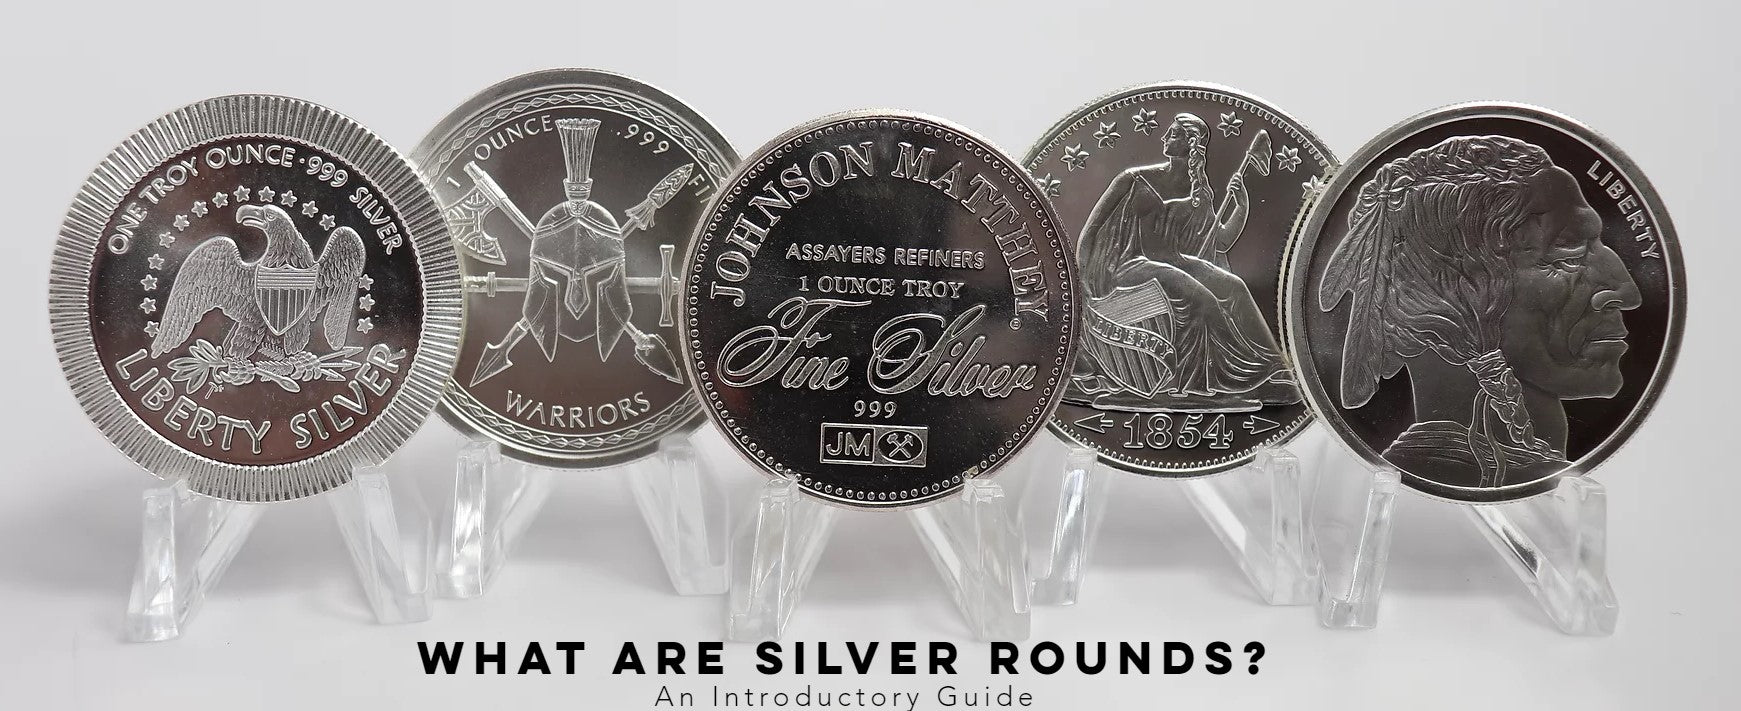 What are Silver Rounds? An Introductory Guide